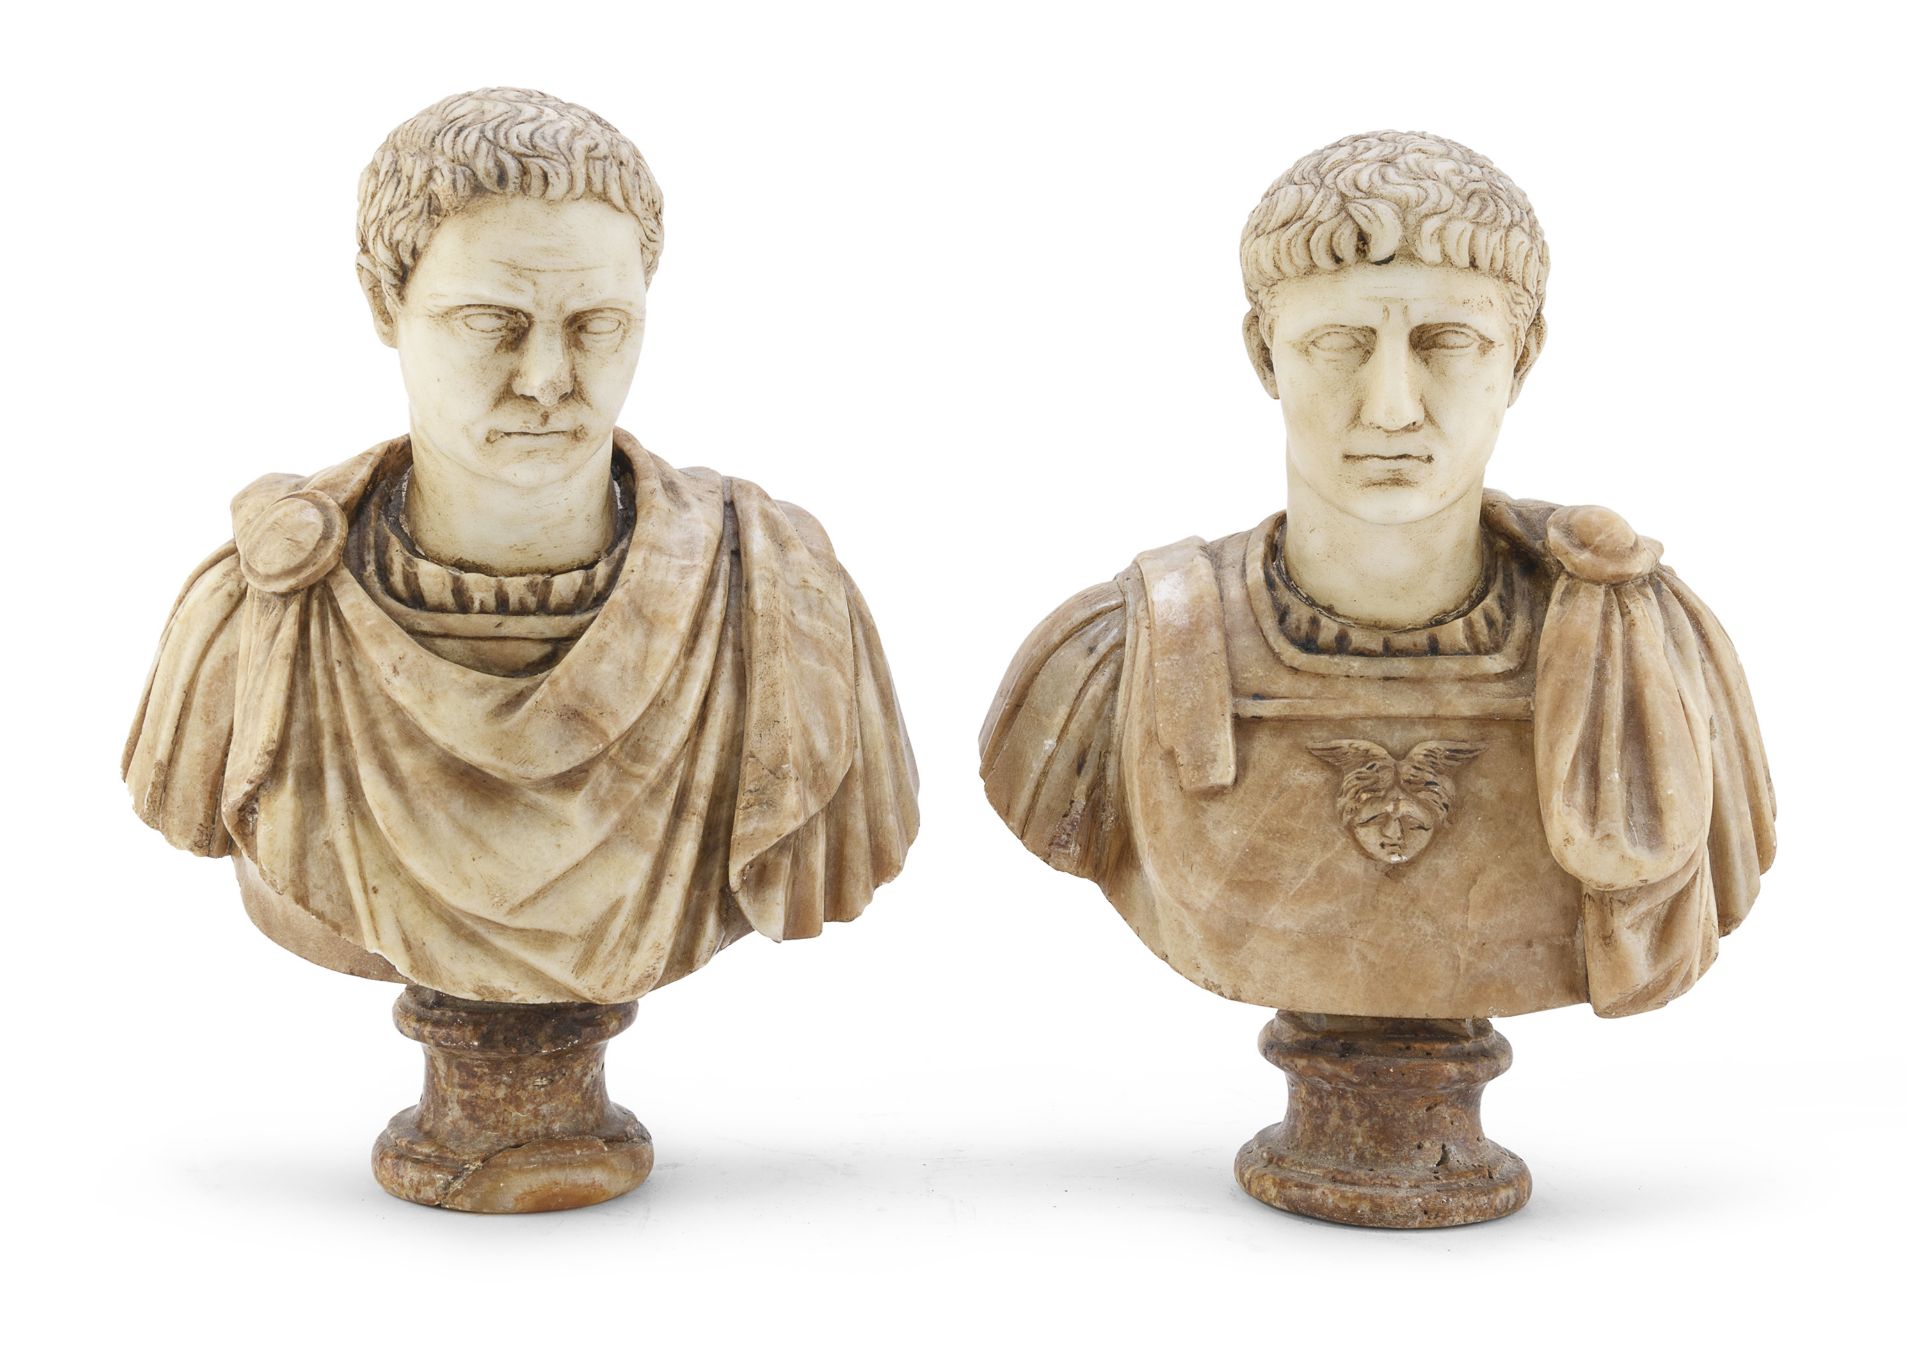 PAIR OF SMALL BUSTS OF ROMAN EMPERORS 19th CENTURY